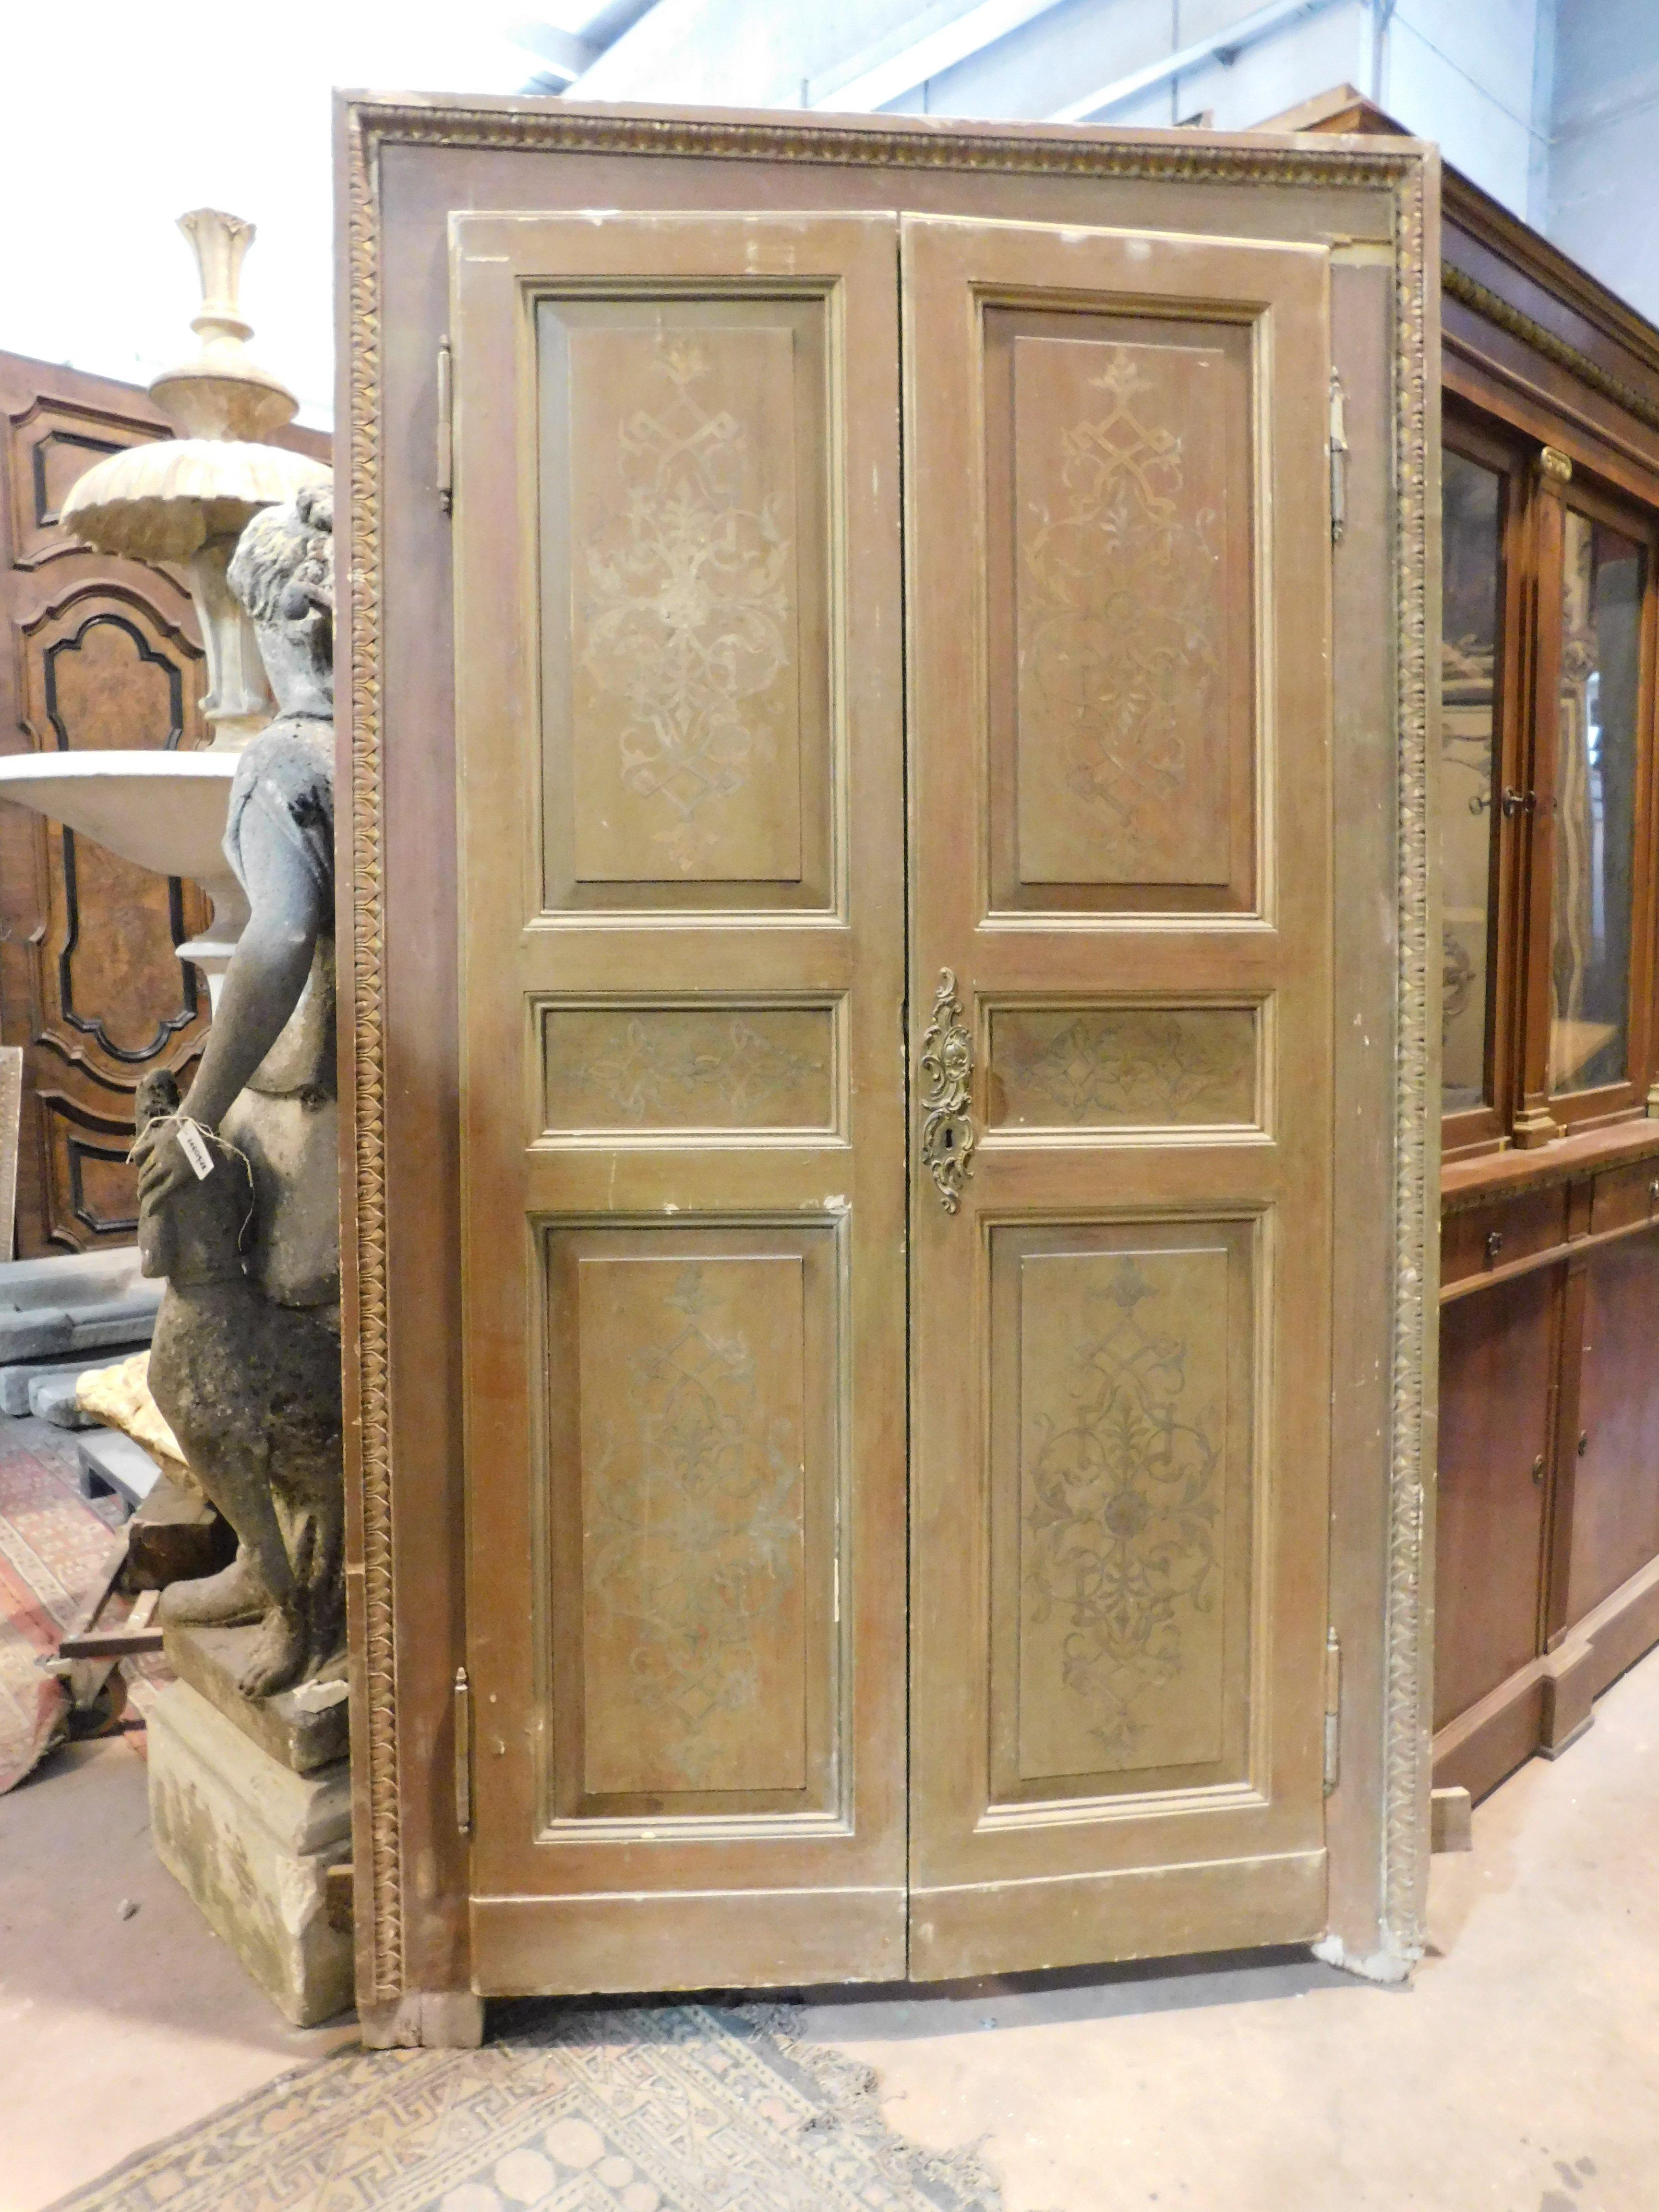 4 lacquered and gilded double leaf interior doors complete with original sculpted frame, built in Italy in the late 1800s.
To be restored in some parts, they have a pull opening so they could also be used as built-in wardrobe doors.
The door in the